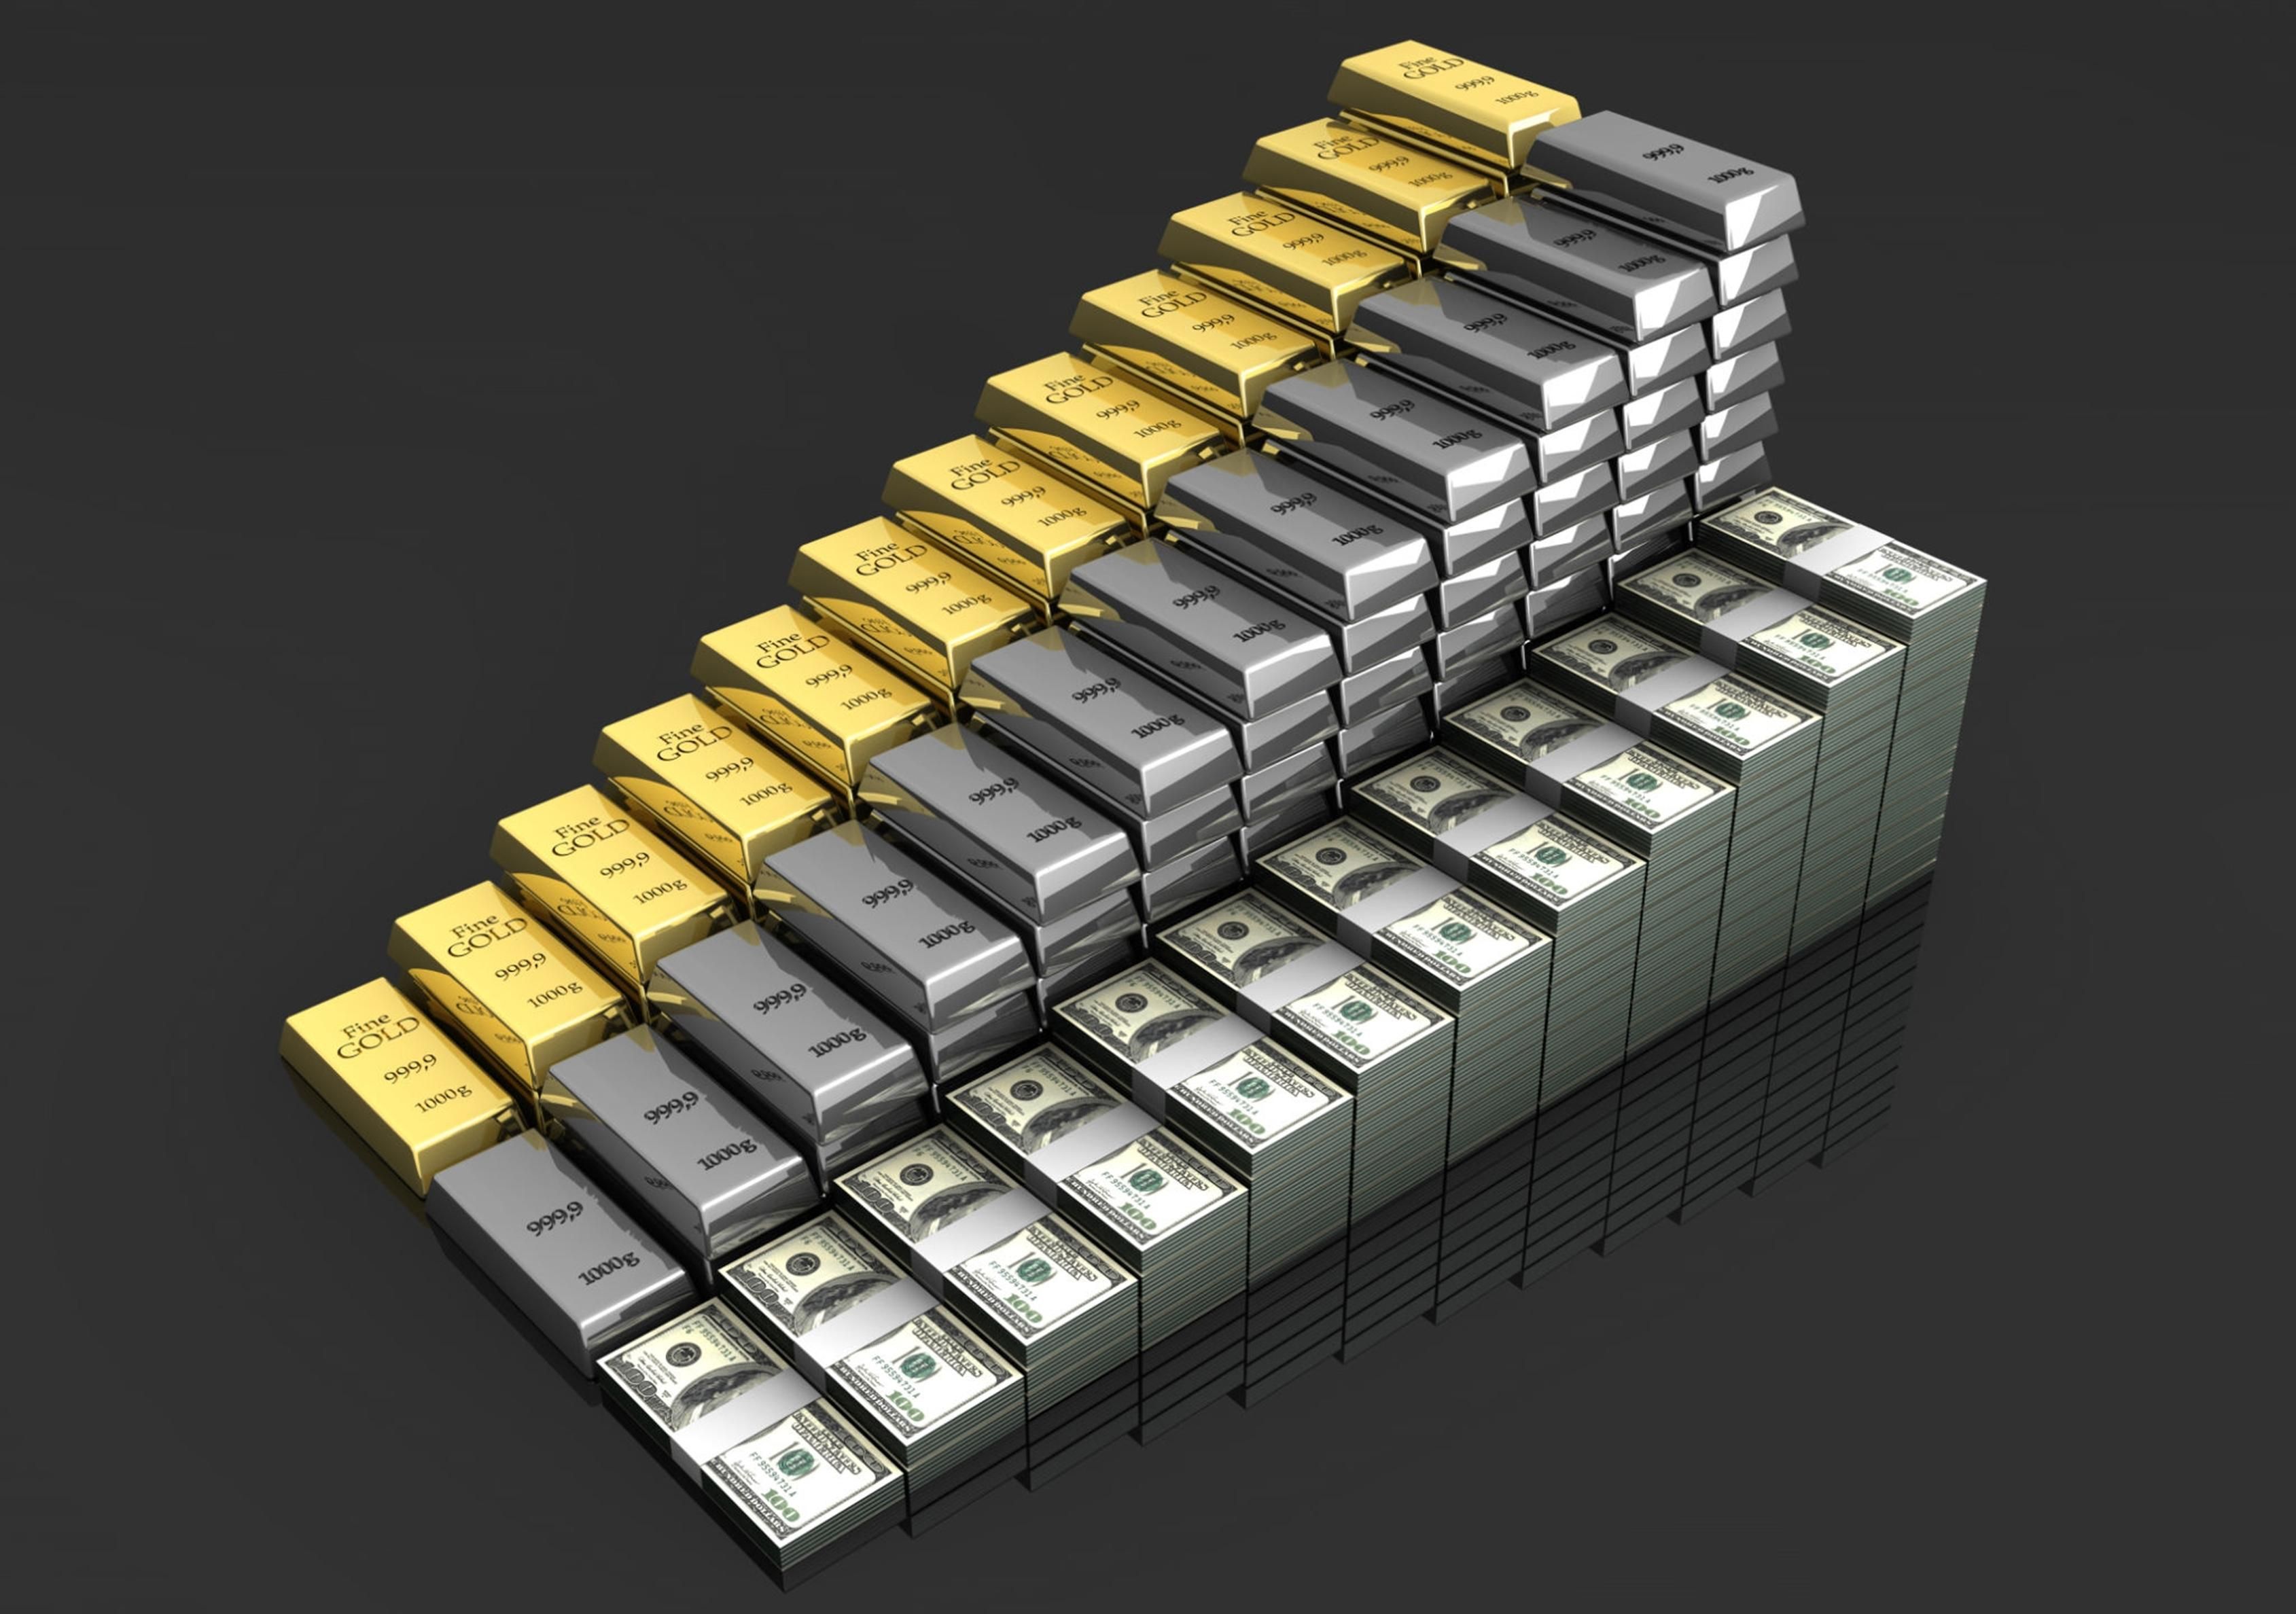 stacks of gold and silver bars, as well as hundred dollar bills forming a set of stairs